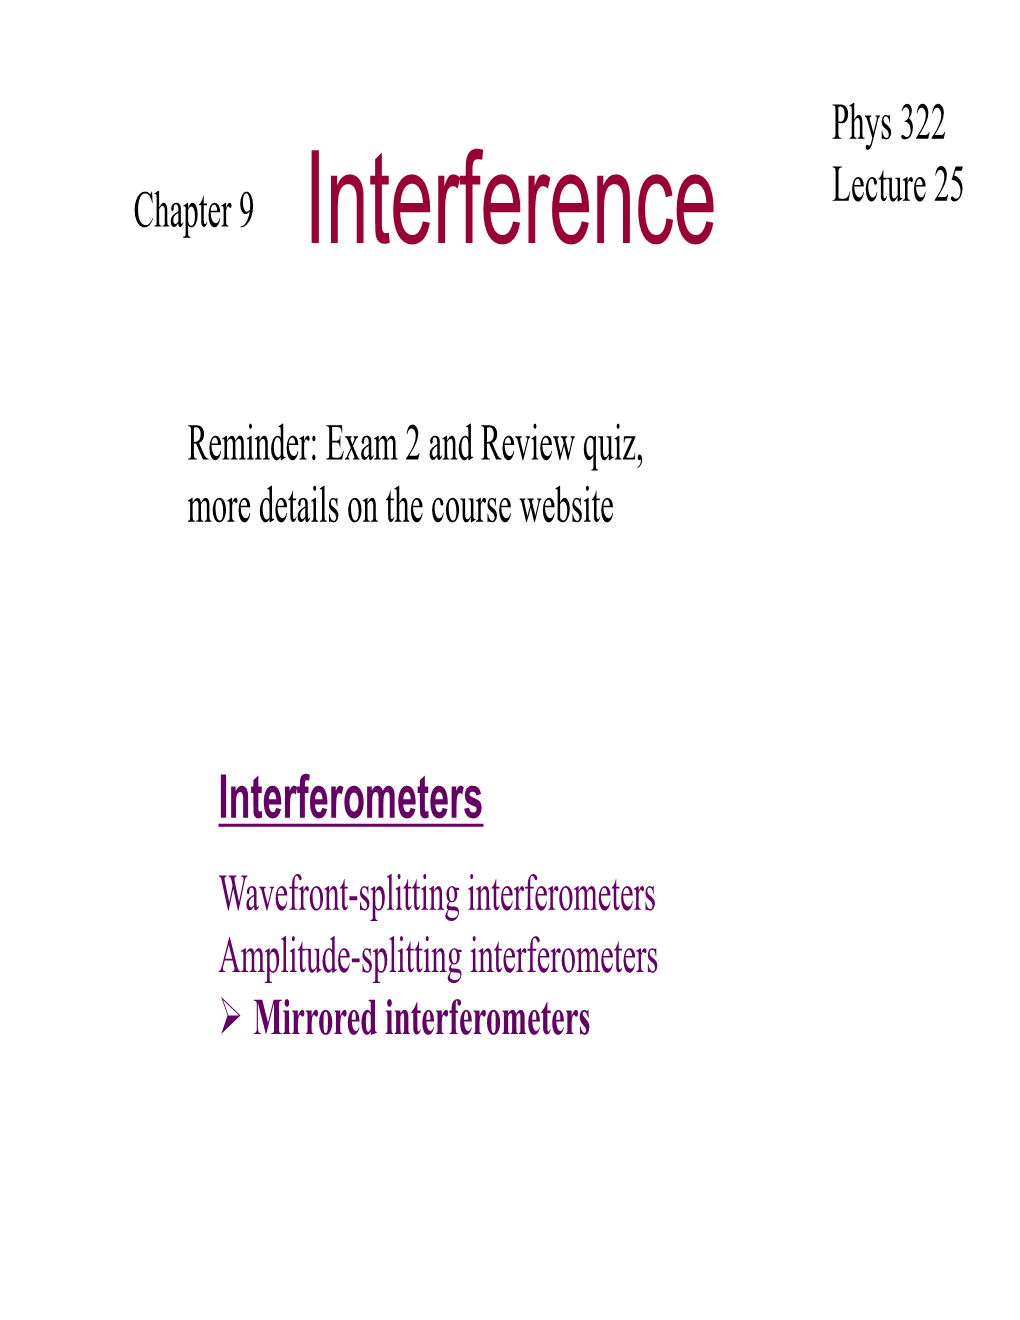 Interference Lecture 25